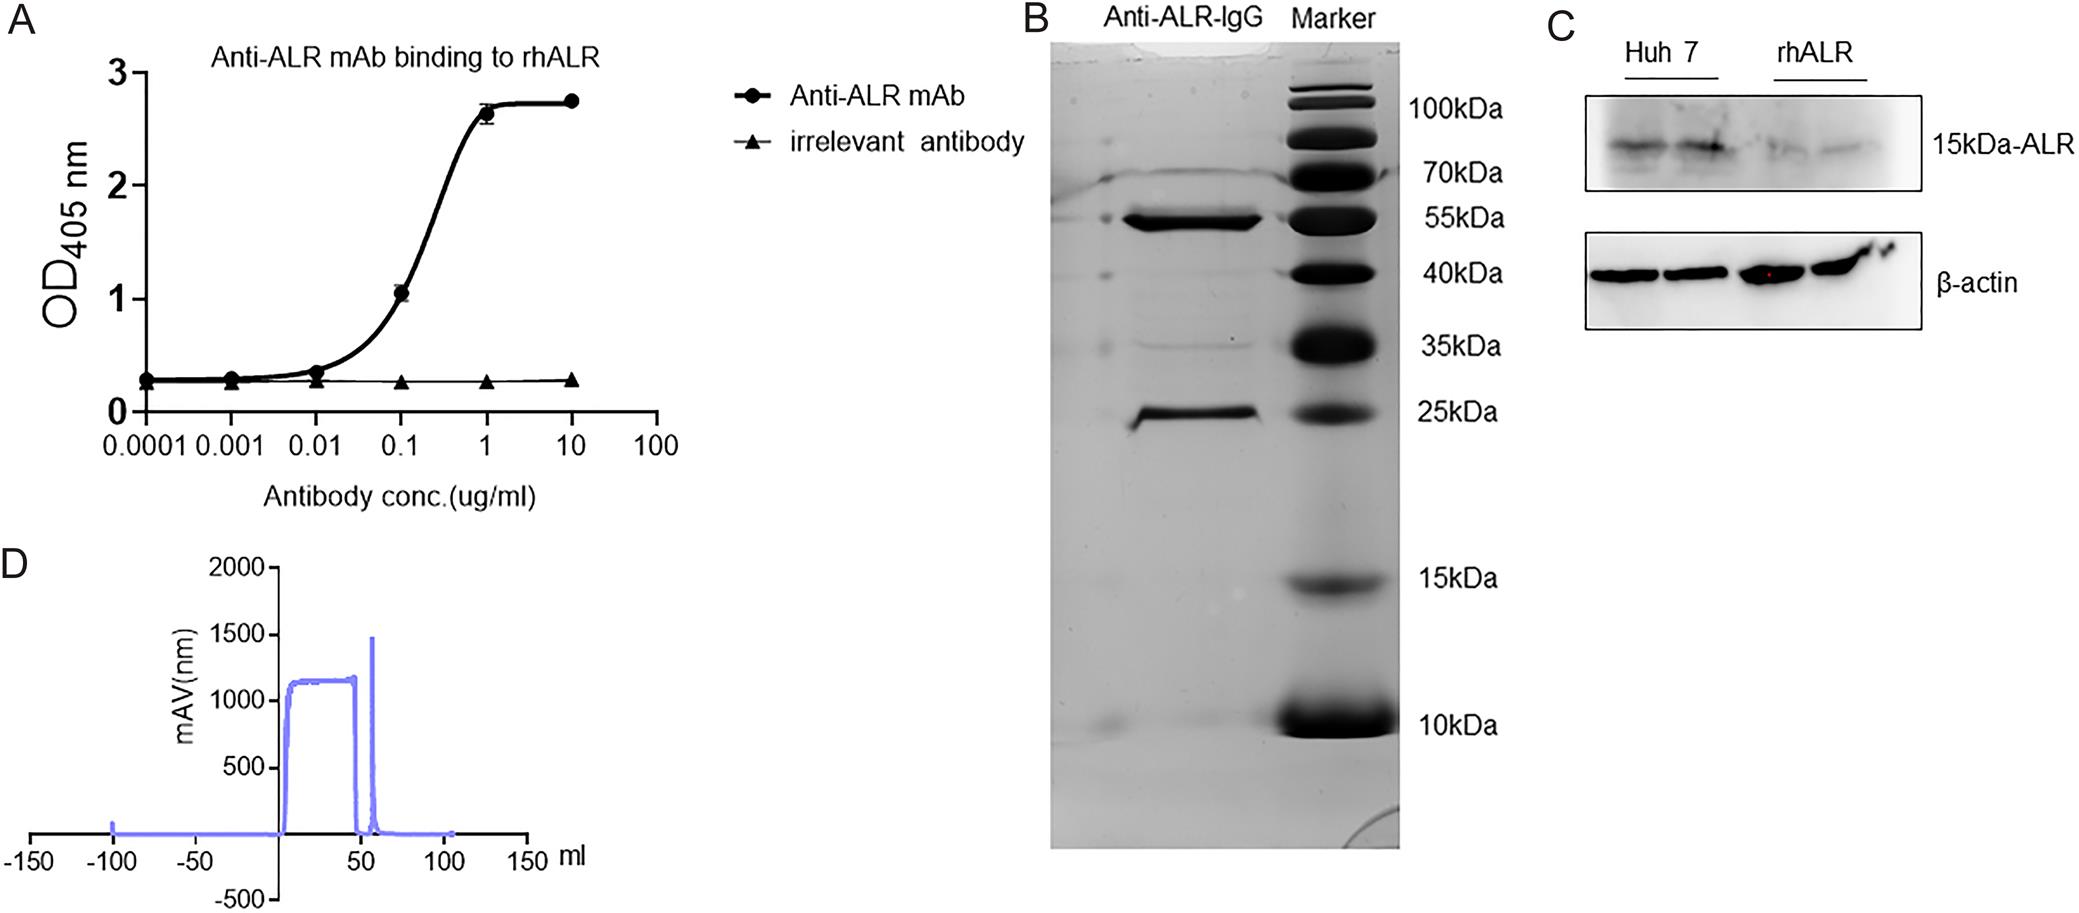 Characterization of the ALR-specific mAb.